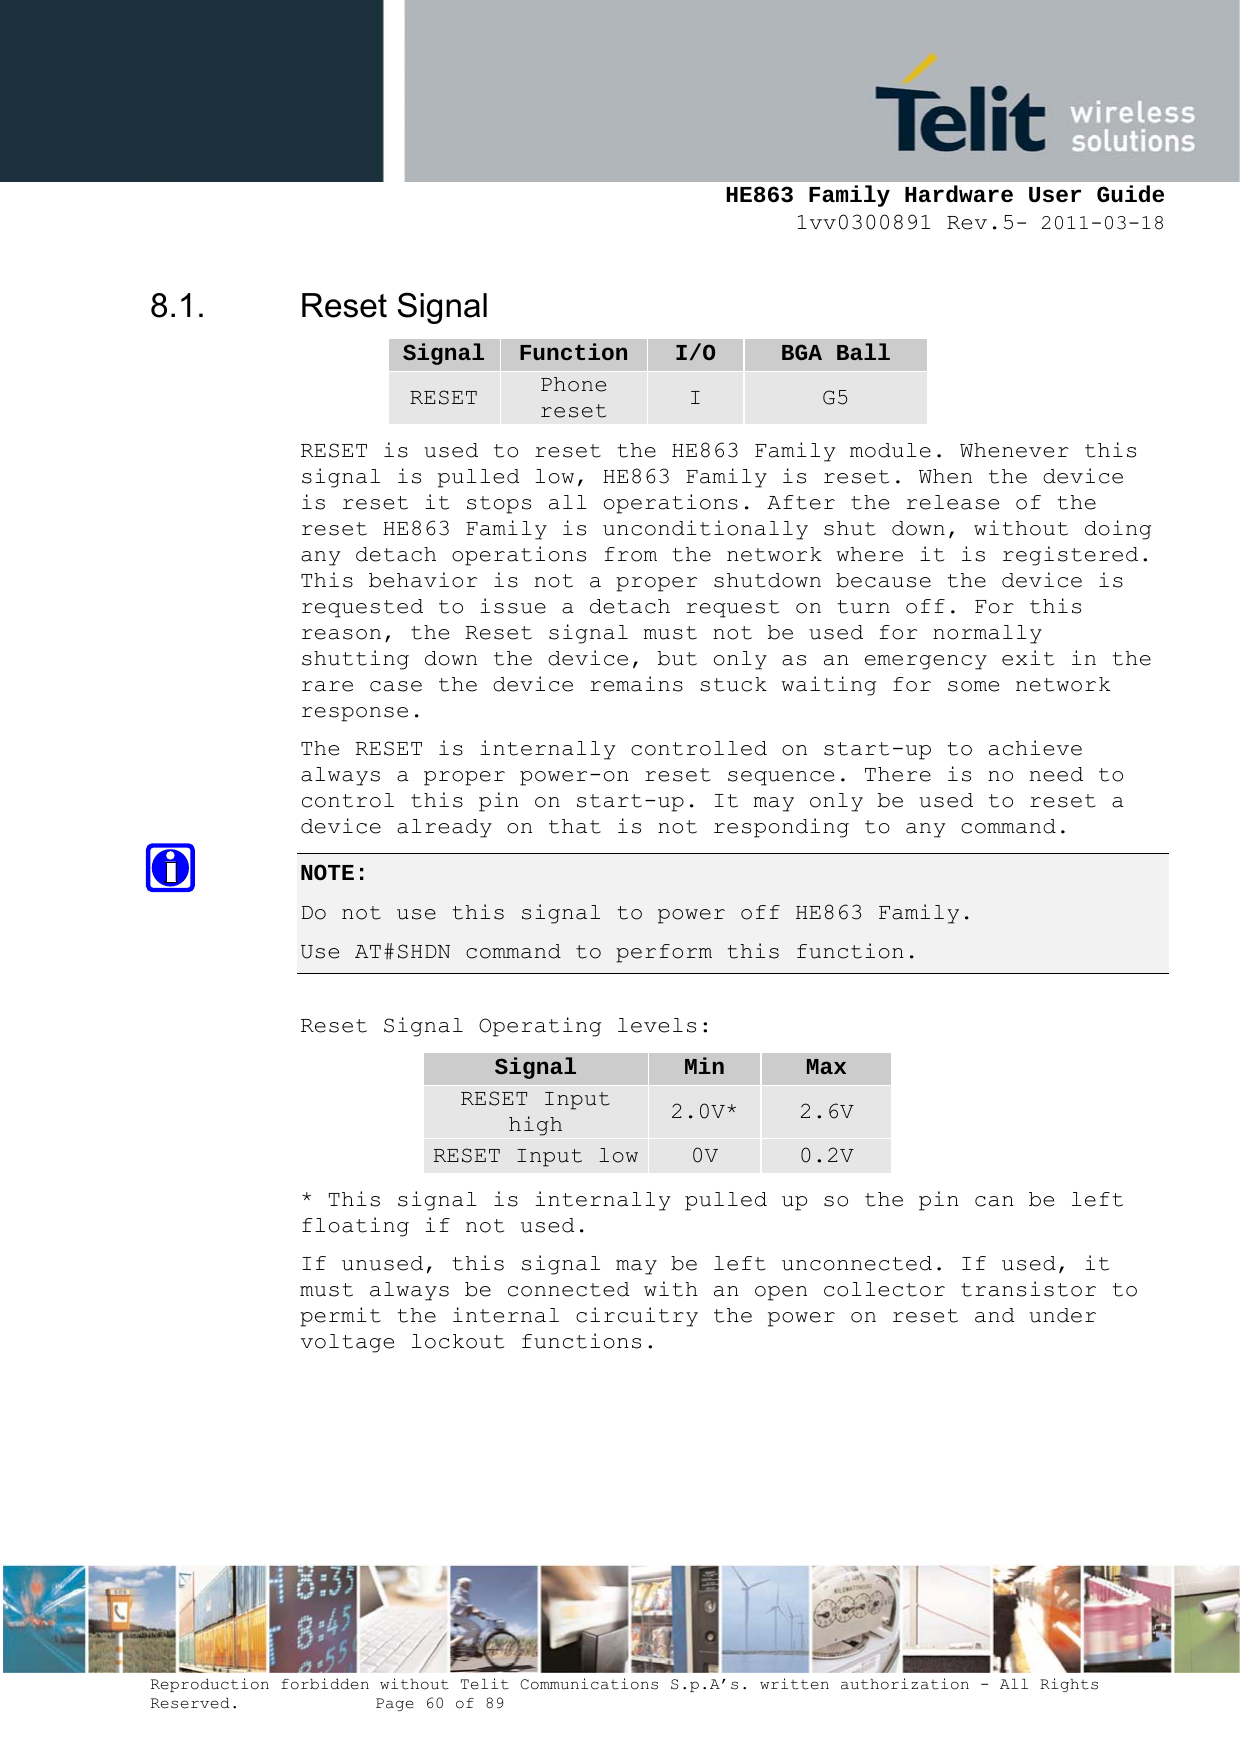     HE863 Family Hardware User Guide 1vv0300891 Rev.5- 2011-03-18    Reproduction forbidden without Telit Communications S.p.A’s. written authorization - All Rights Reserved.    Page 60 of 89  8.1. Reset Signal Signal  Function I/O  BGA Ball RESET  Phone reset  I  G5 RESET is used to reset the HE863 Family module. Whenever this signal is pulled low, HE863 Family is reset. When the device is reset it stops all operations. After the release of the reset HE863 Family is unconditionally shut down, without doing any detach operations from the network where it is registered. This behavior is not a proper shutdown because the device is requested to issue a detach request on turn off. For this reason, the Reset signal must not be used for normally shutting down the device, but only as an emergency exit in the rare case the device remains stuck waiting for some network response. The RESET is internally controlled on start-up to achieve always a proper power-on reset sequence. There is no need to control this pin on start-up. It may only be used to reset a device already on that is not responding to any command. NOTE:  Do not use this signal to power off HE863 Family. Use AT#SHDN command to perform this function.  Reset Signal Operating levels: Signal  Min  Max RESET Input high  2.0V*  2.6V RESET Input low 0V  0.2V * This signal is internally pulled up so the pin can be left floating if not used. If unused, this signal may be left unconnected. If used, it must always be connected with an open collector transistor to permit the internal circuitry the power on reset and under voltage lockout functions. 